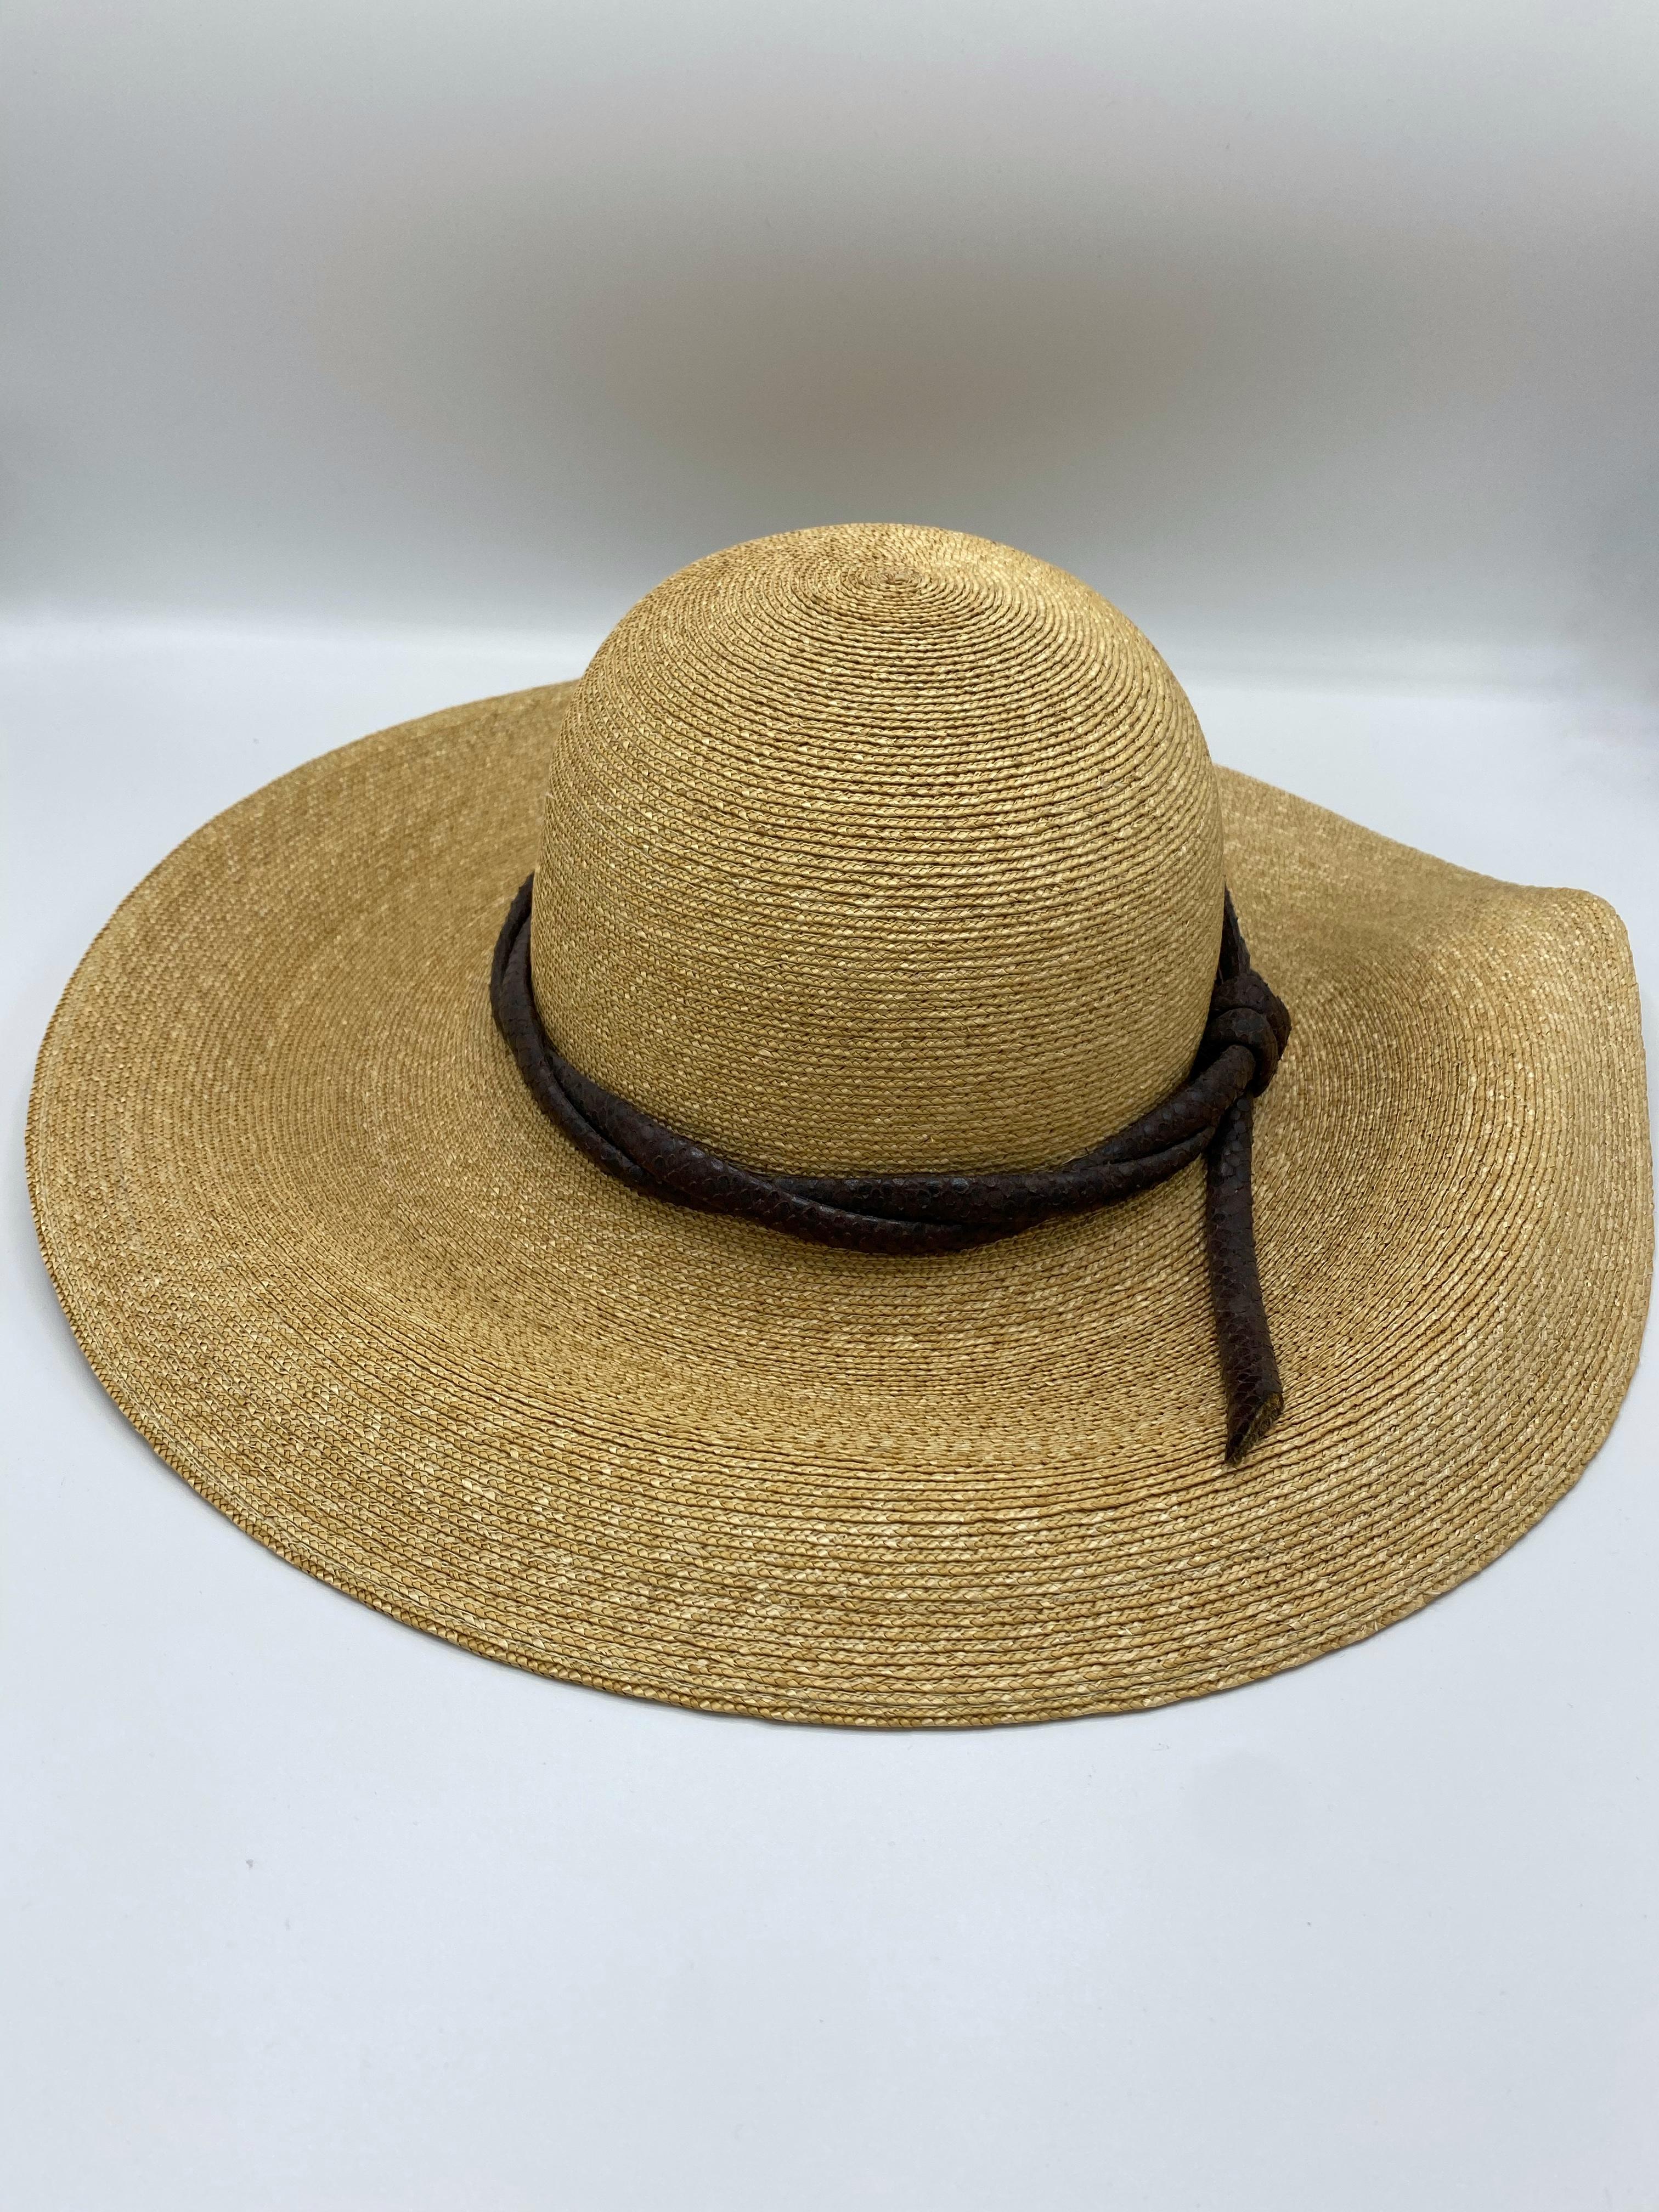 Product details:

100% natural fibers.
Featuring light beige color straw hat with brown animal skin leather cord like design detail around.
Measurements: 22